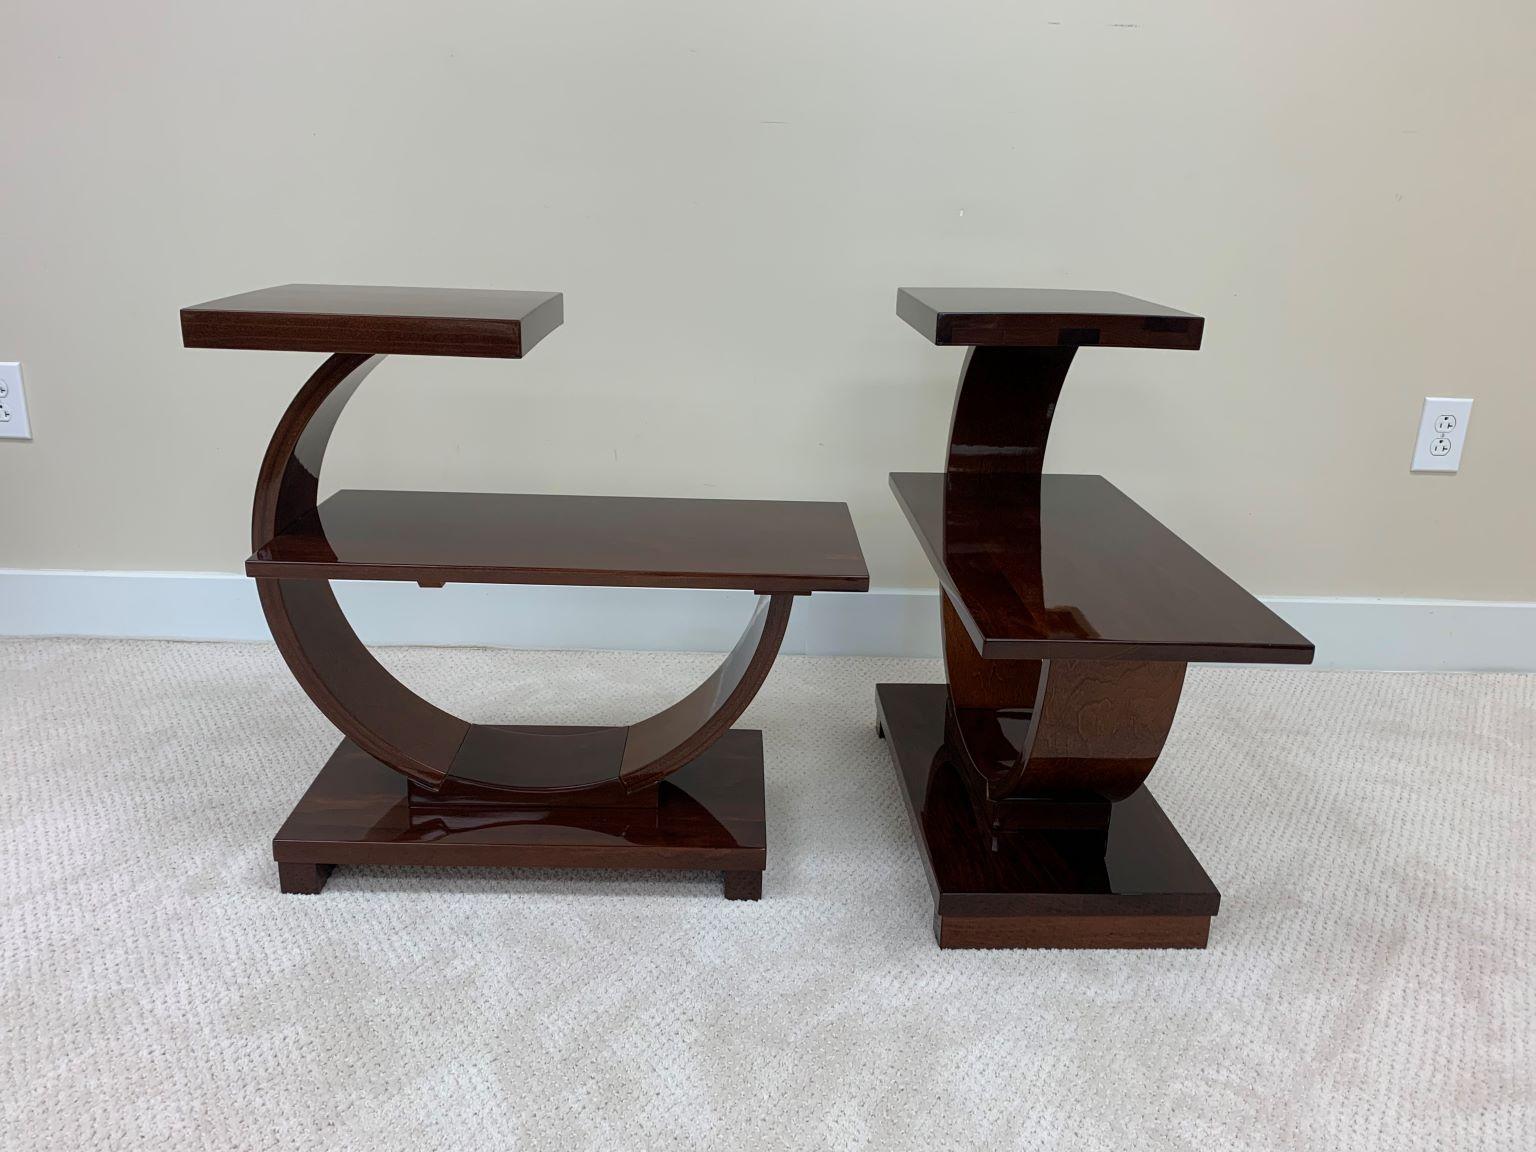 Stained Pair of Machine Age Art Deco Curving End Tables by Modernage Furniture Company